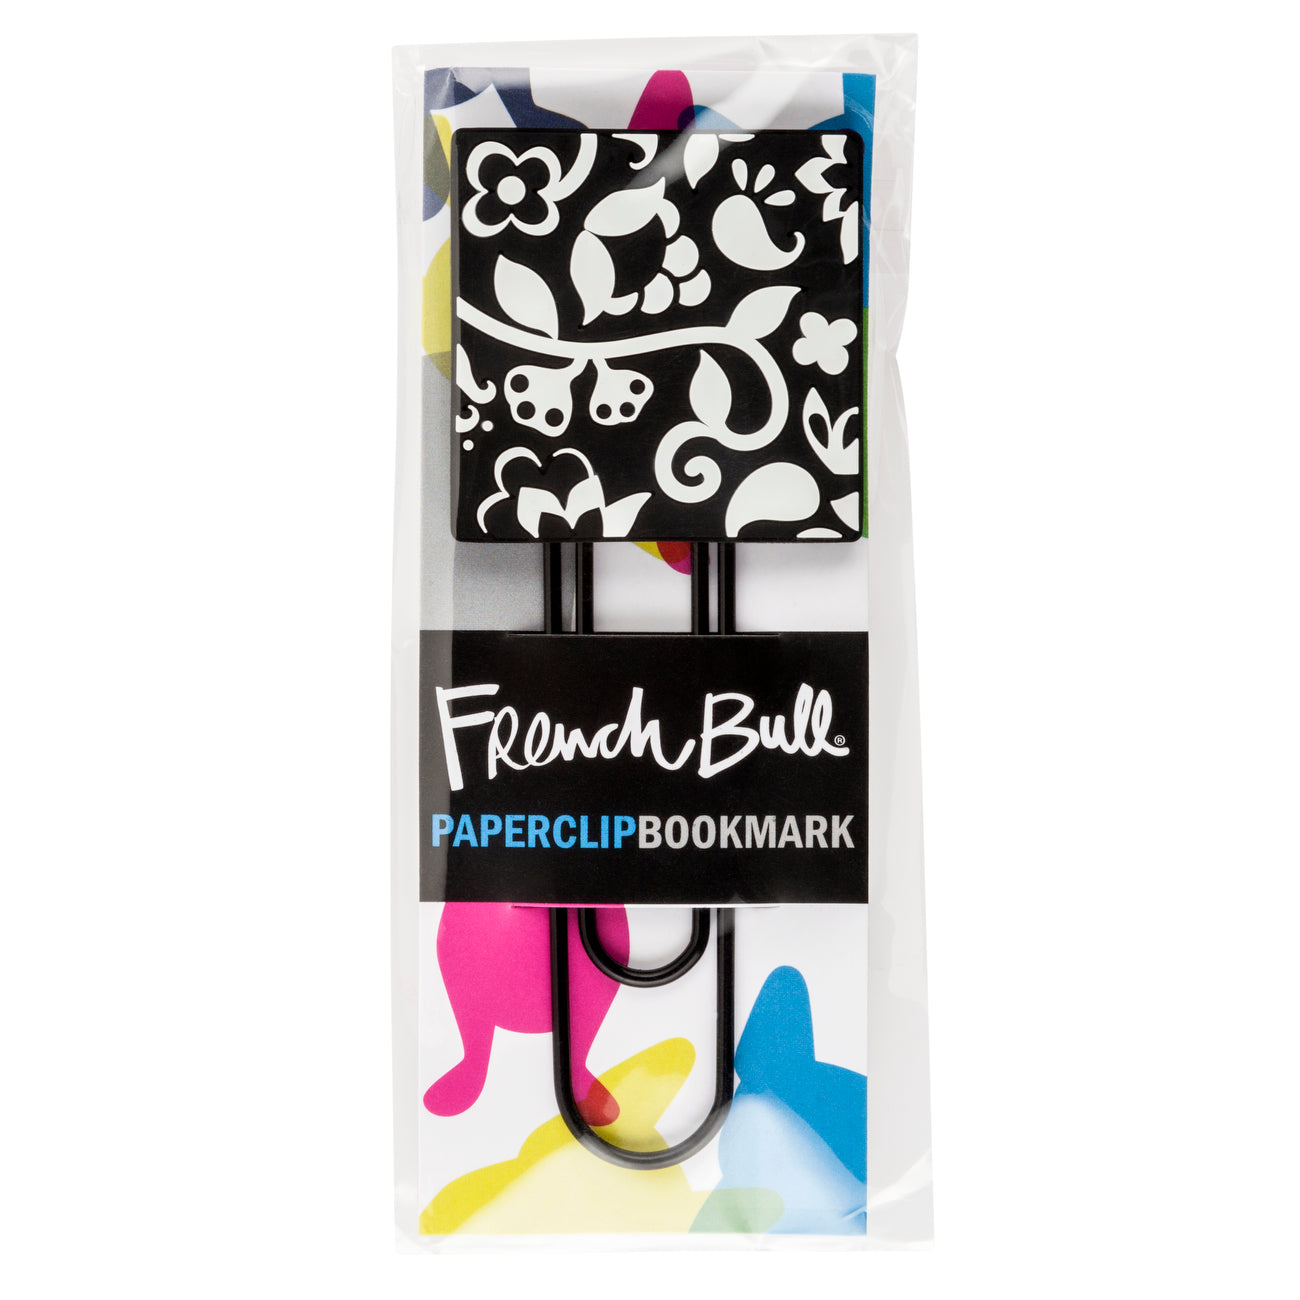 Silicone Paper Clip Bookmark by French Bull